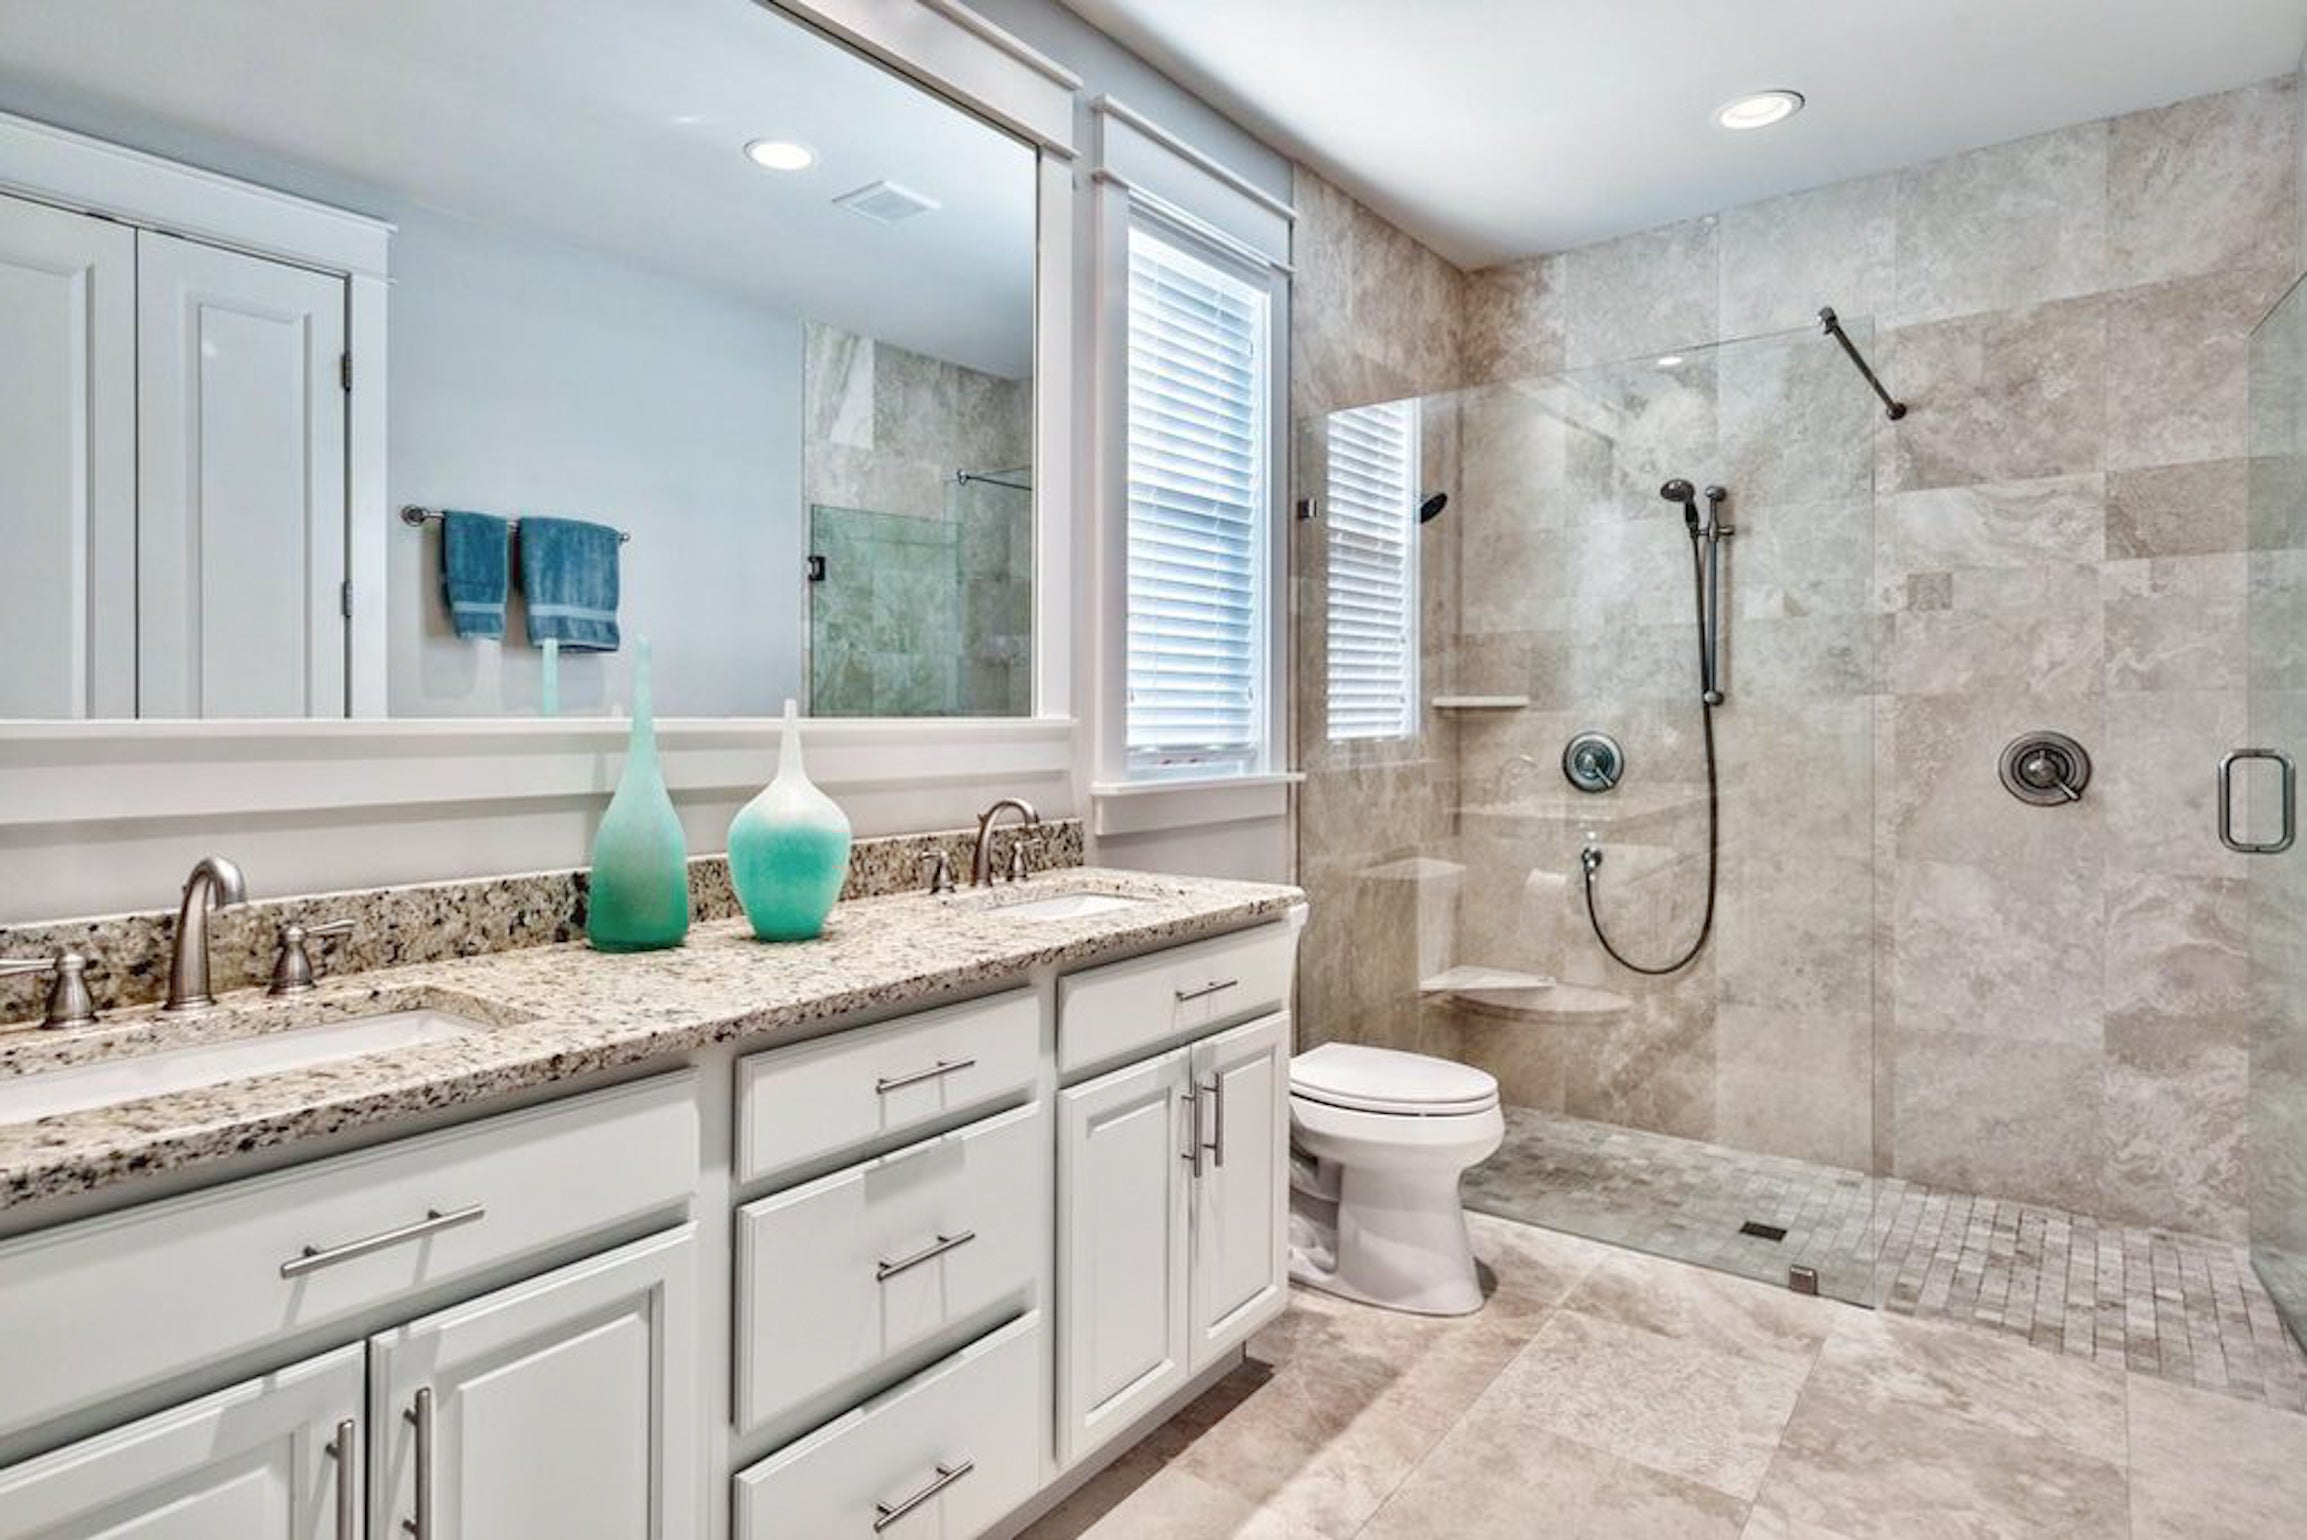 Master bath - dual sinks and walk-in shower